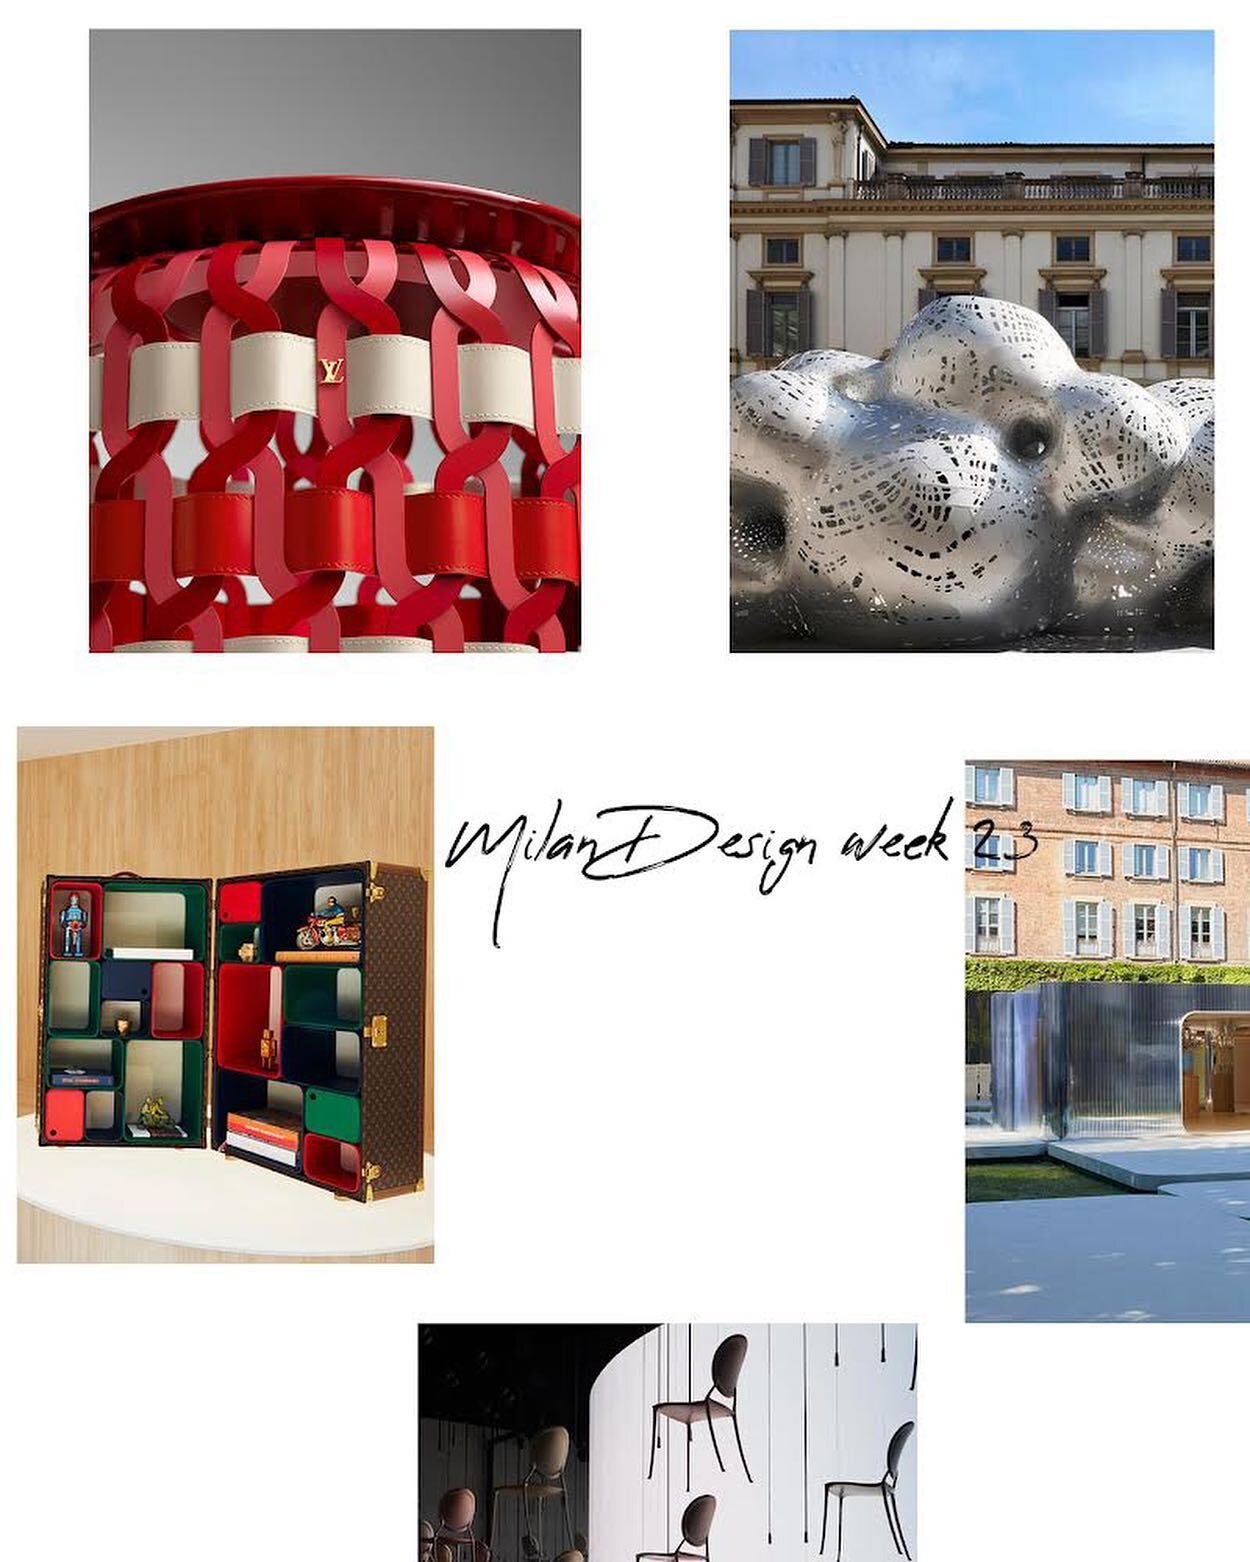 An overview of @milan.design.week . 
-
Milan design week has been a major event in the global design community, showcasing the latest trends and innovations in furniture, lighting, and interior design. The city of Milan attracts designers, architects